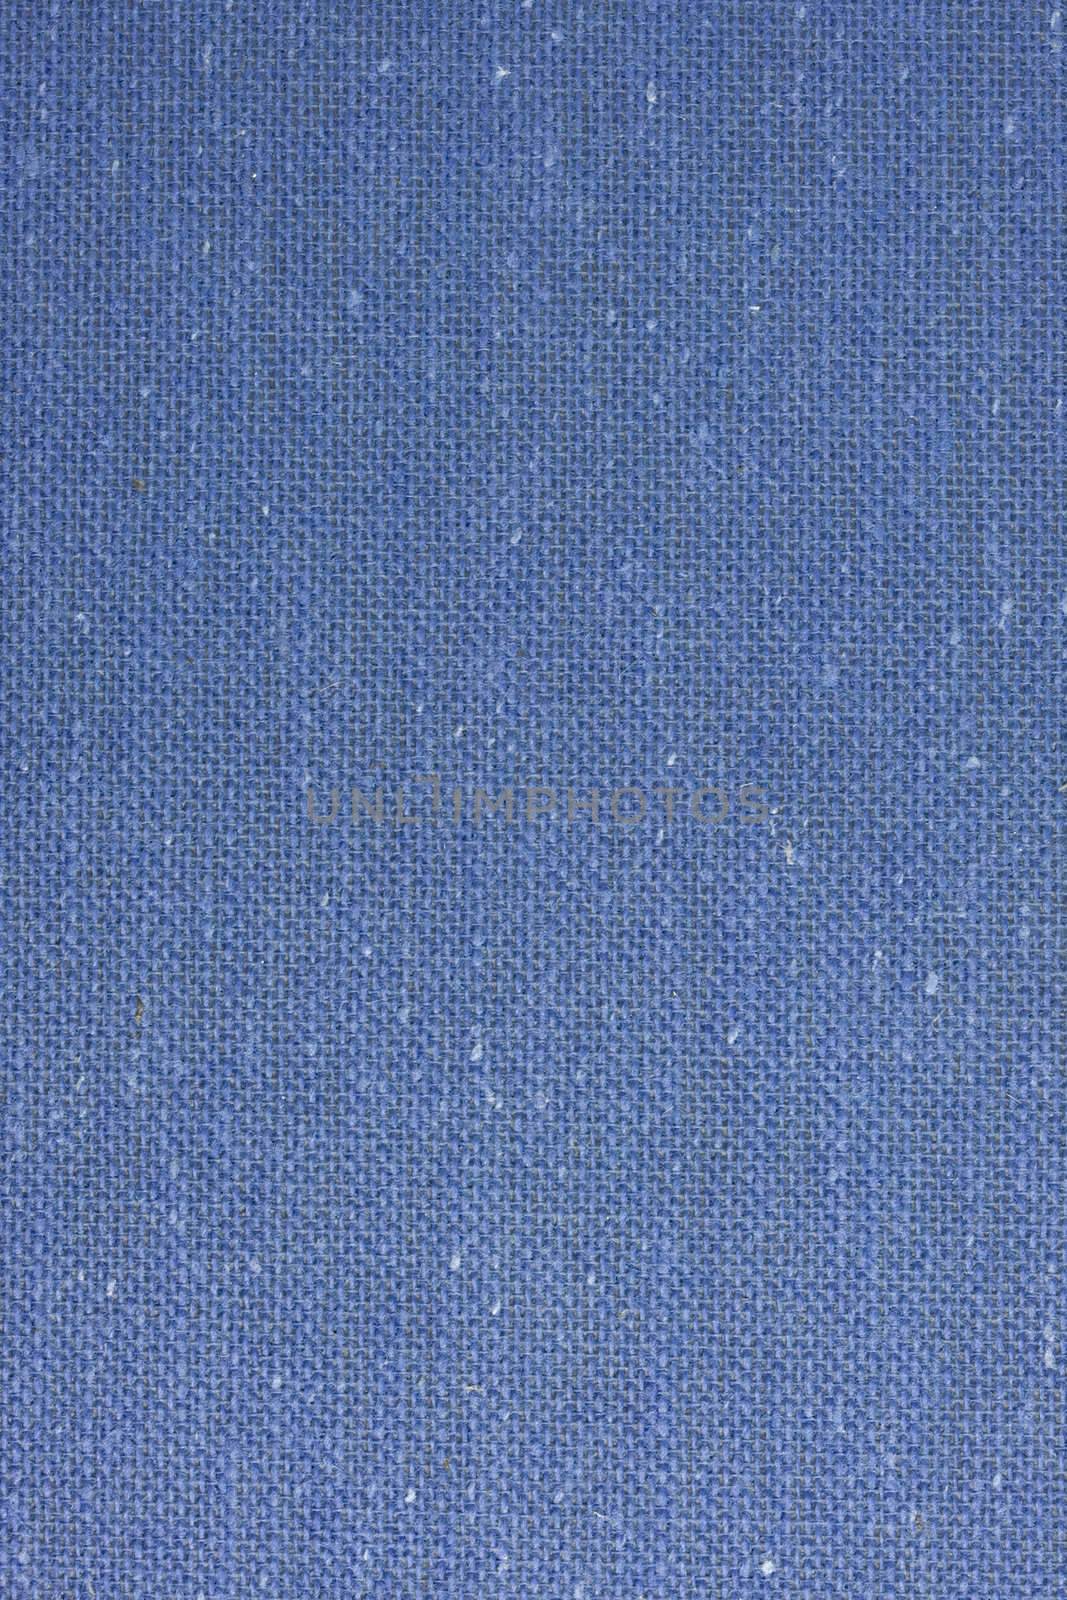 dark blue textile background from 1960s book cover